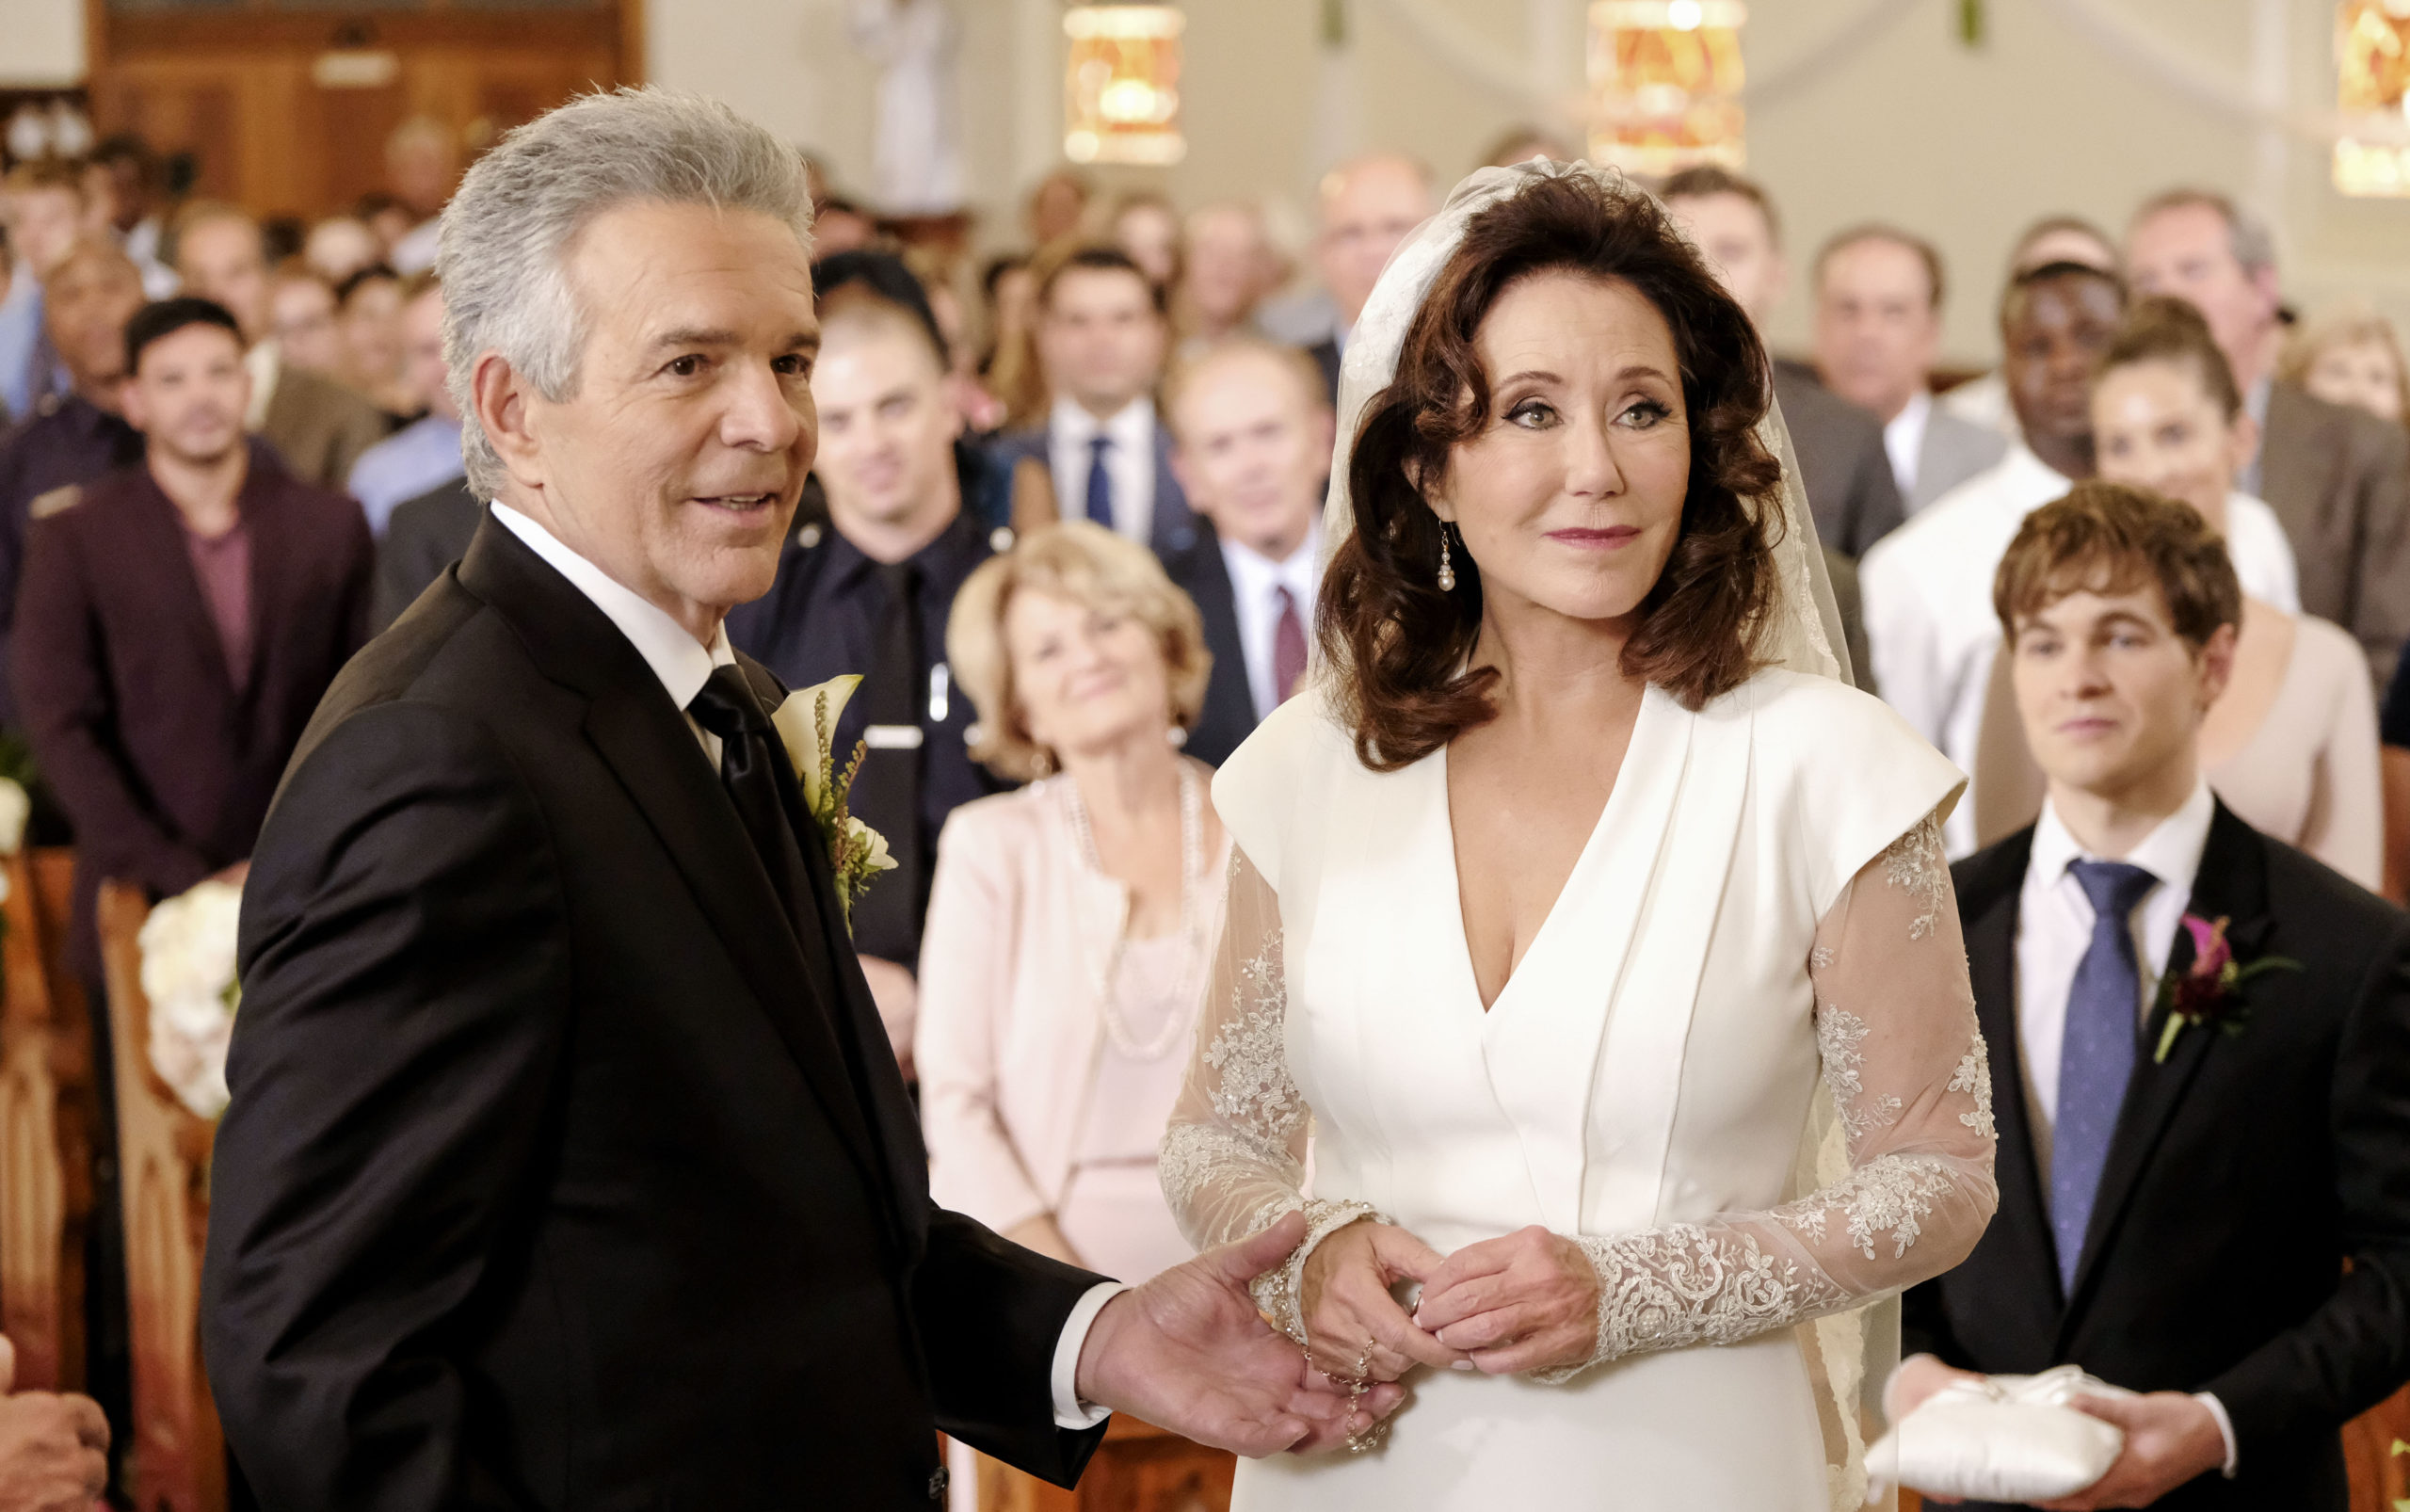 Tony Denison and Mary McDonnell